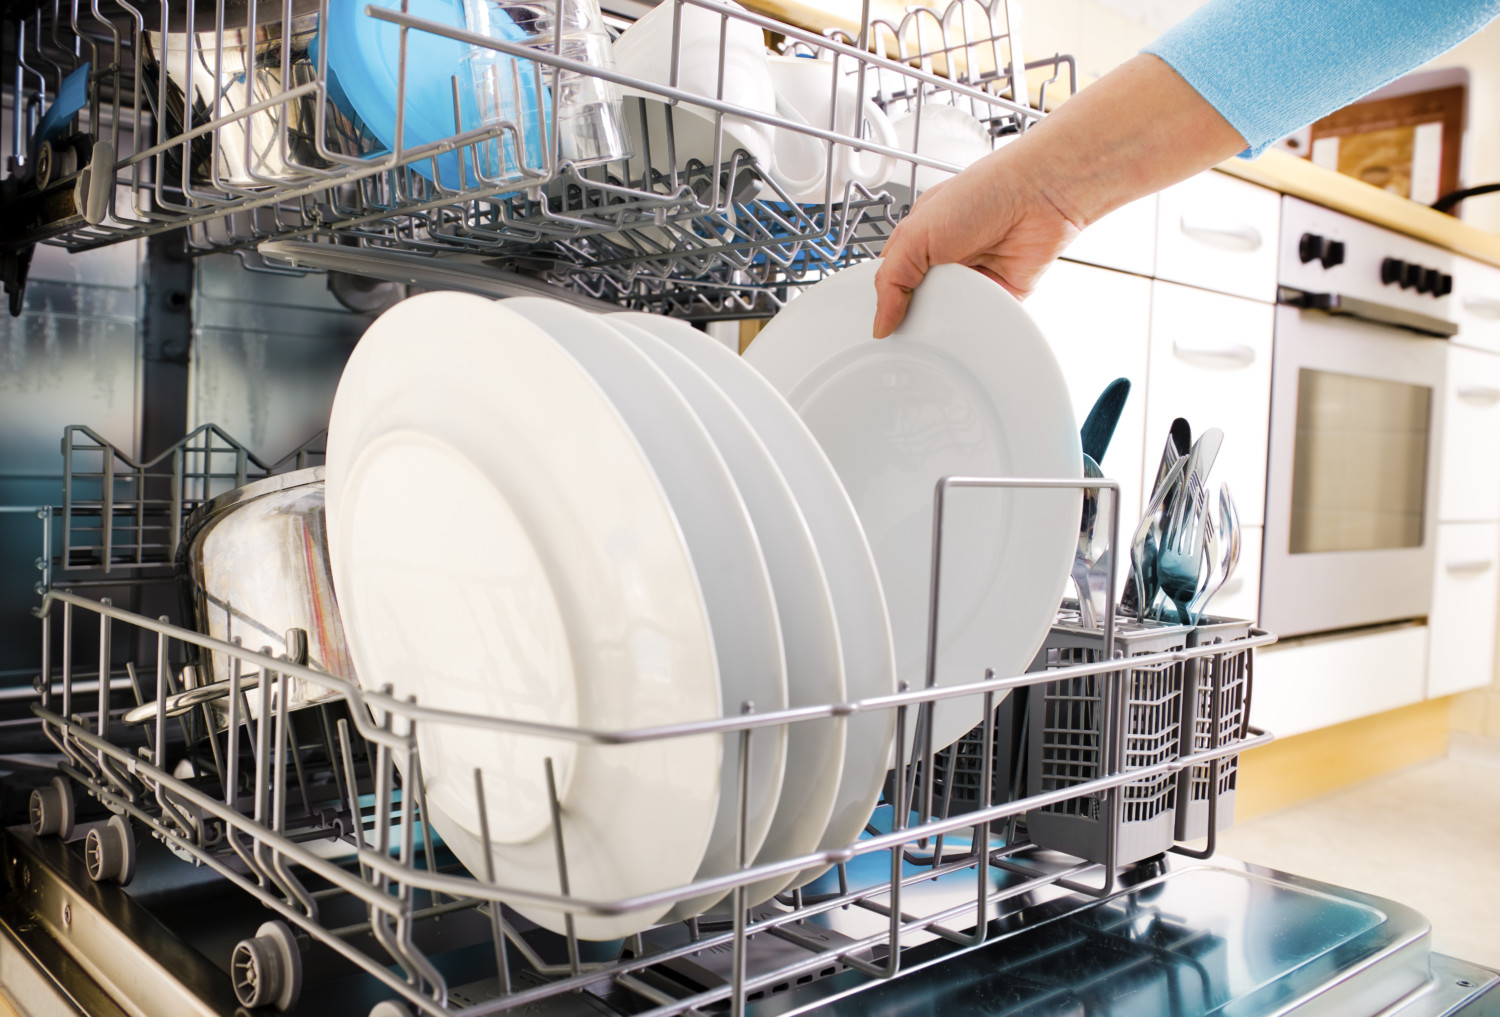 A person loads clean plates into a dishwasher